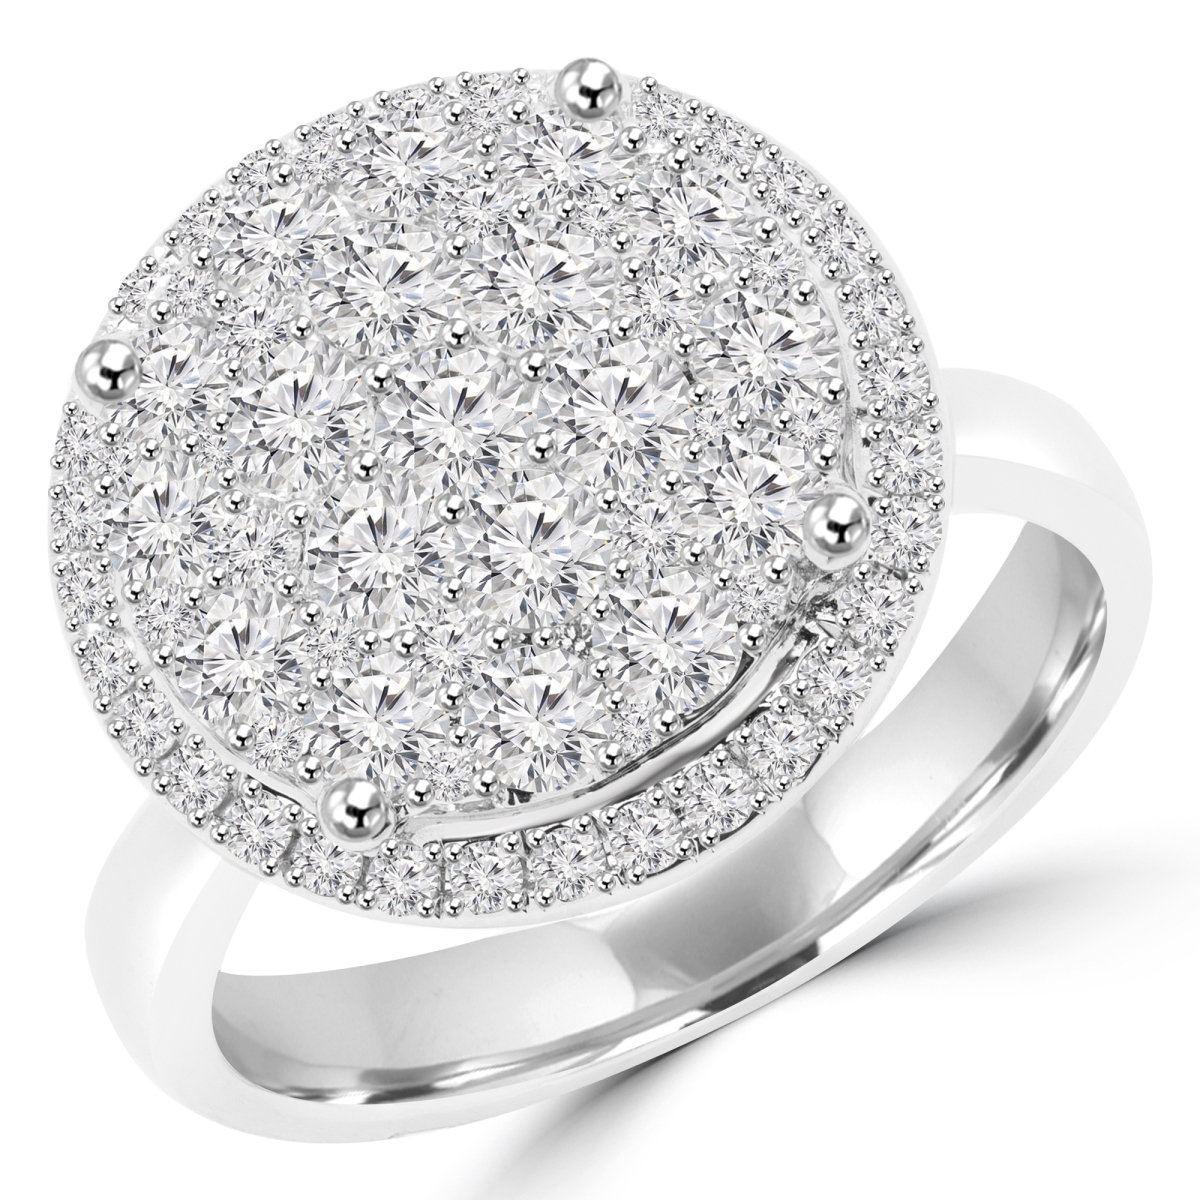 MD160293-3.5 1.5 CTW Pave Set Diamond Cluster Fashion Engagement Ring in 18K White Gold - Size 3.5 -  Majesty Diamonds